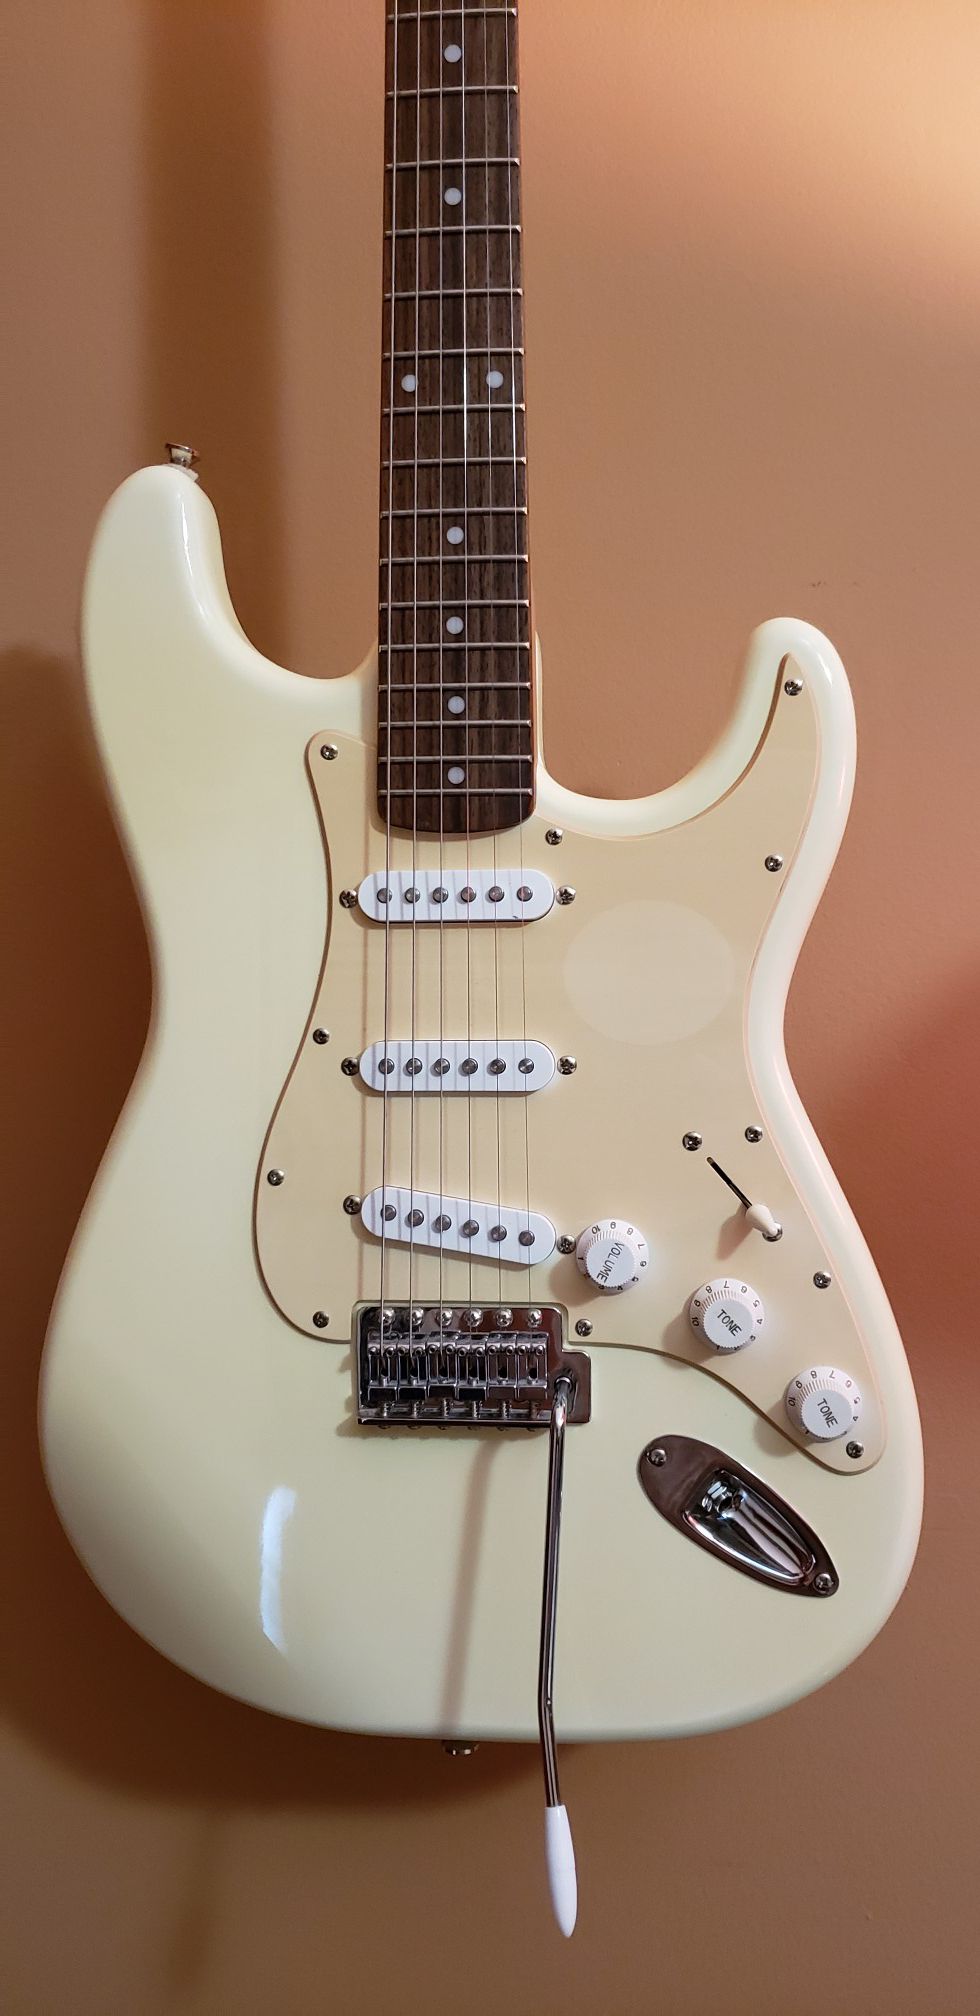 Fender Stratocaster guitar squier with soft gig bag , very good condition .Sounds amazing for this level of guitar made by fender.